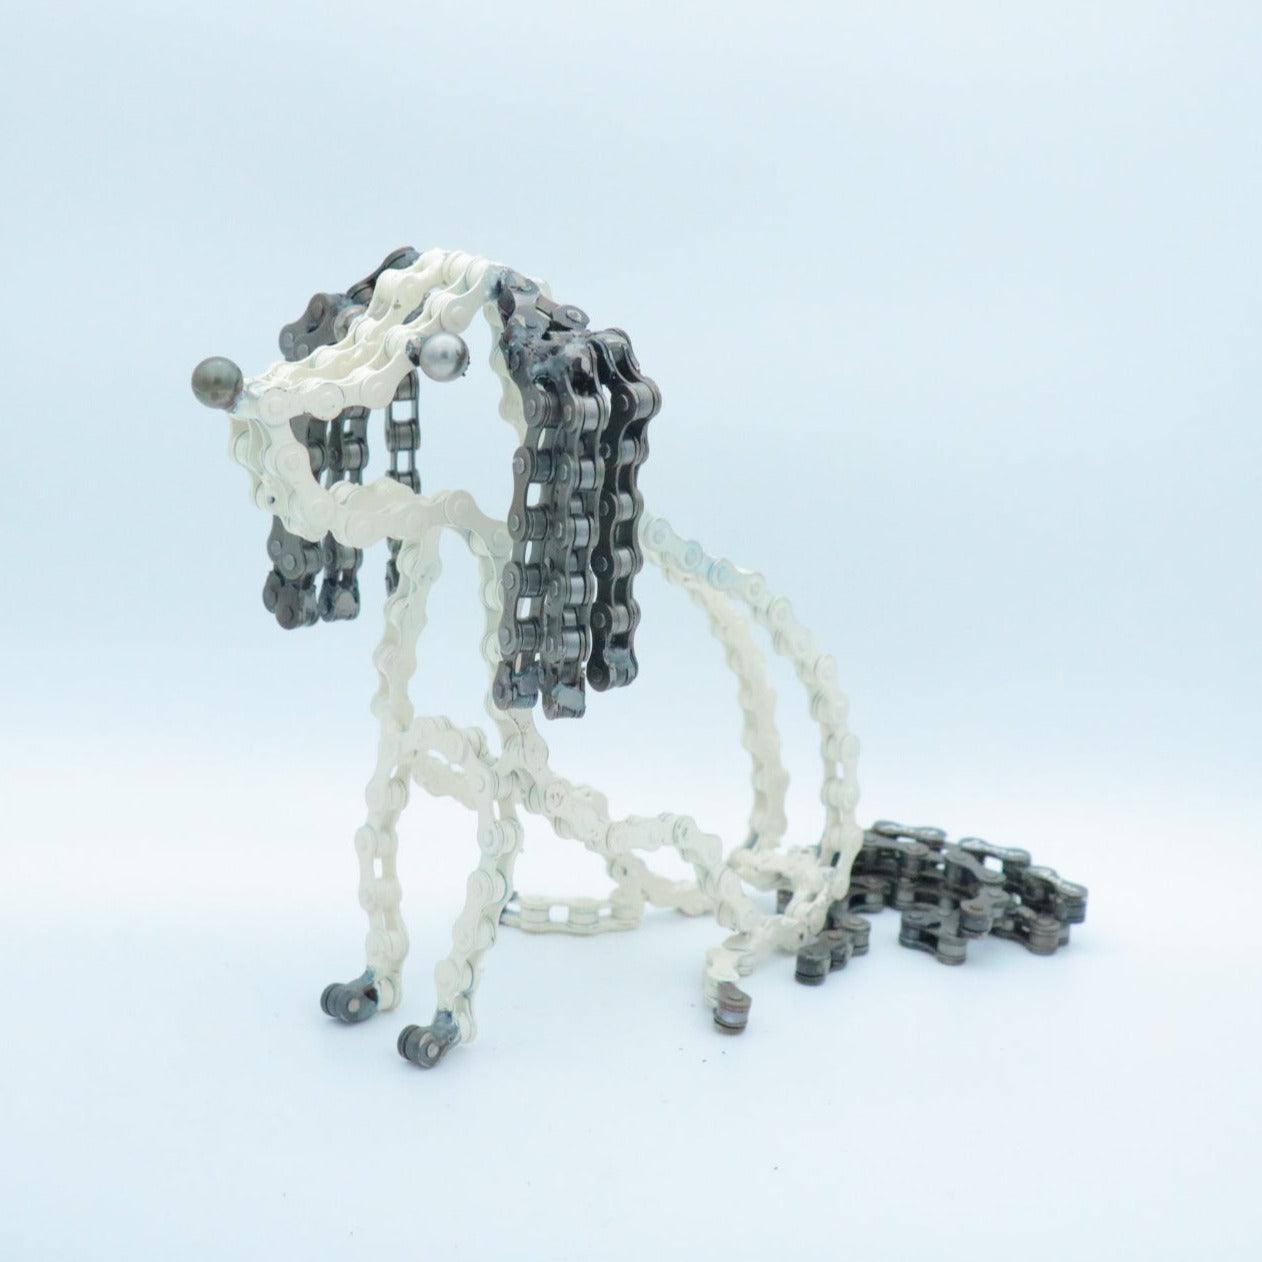 Cavalier King Charles Spaniel Sculpture (Max) | UNCHAINED by NIRIT LEVAV PACKER